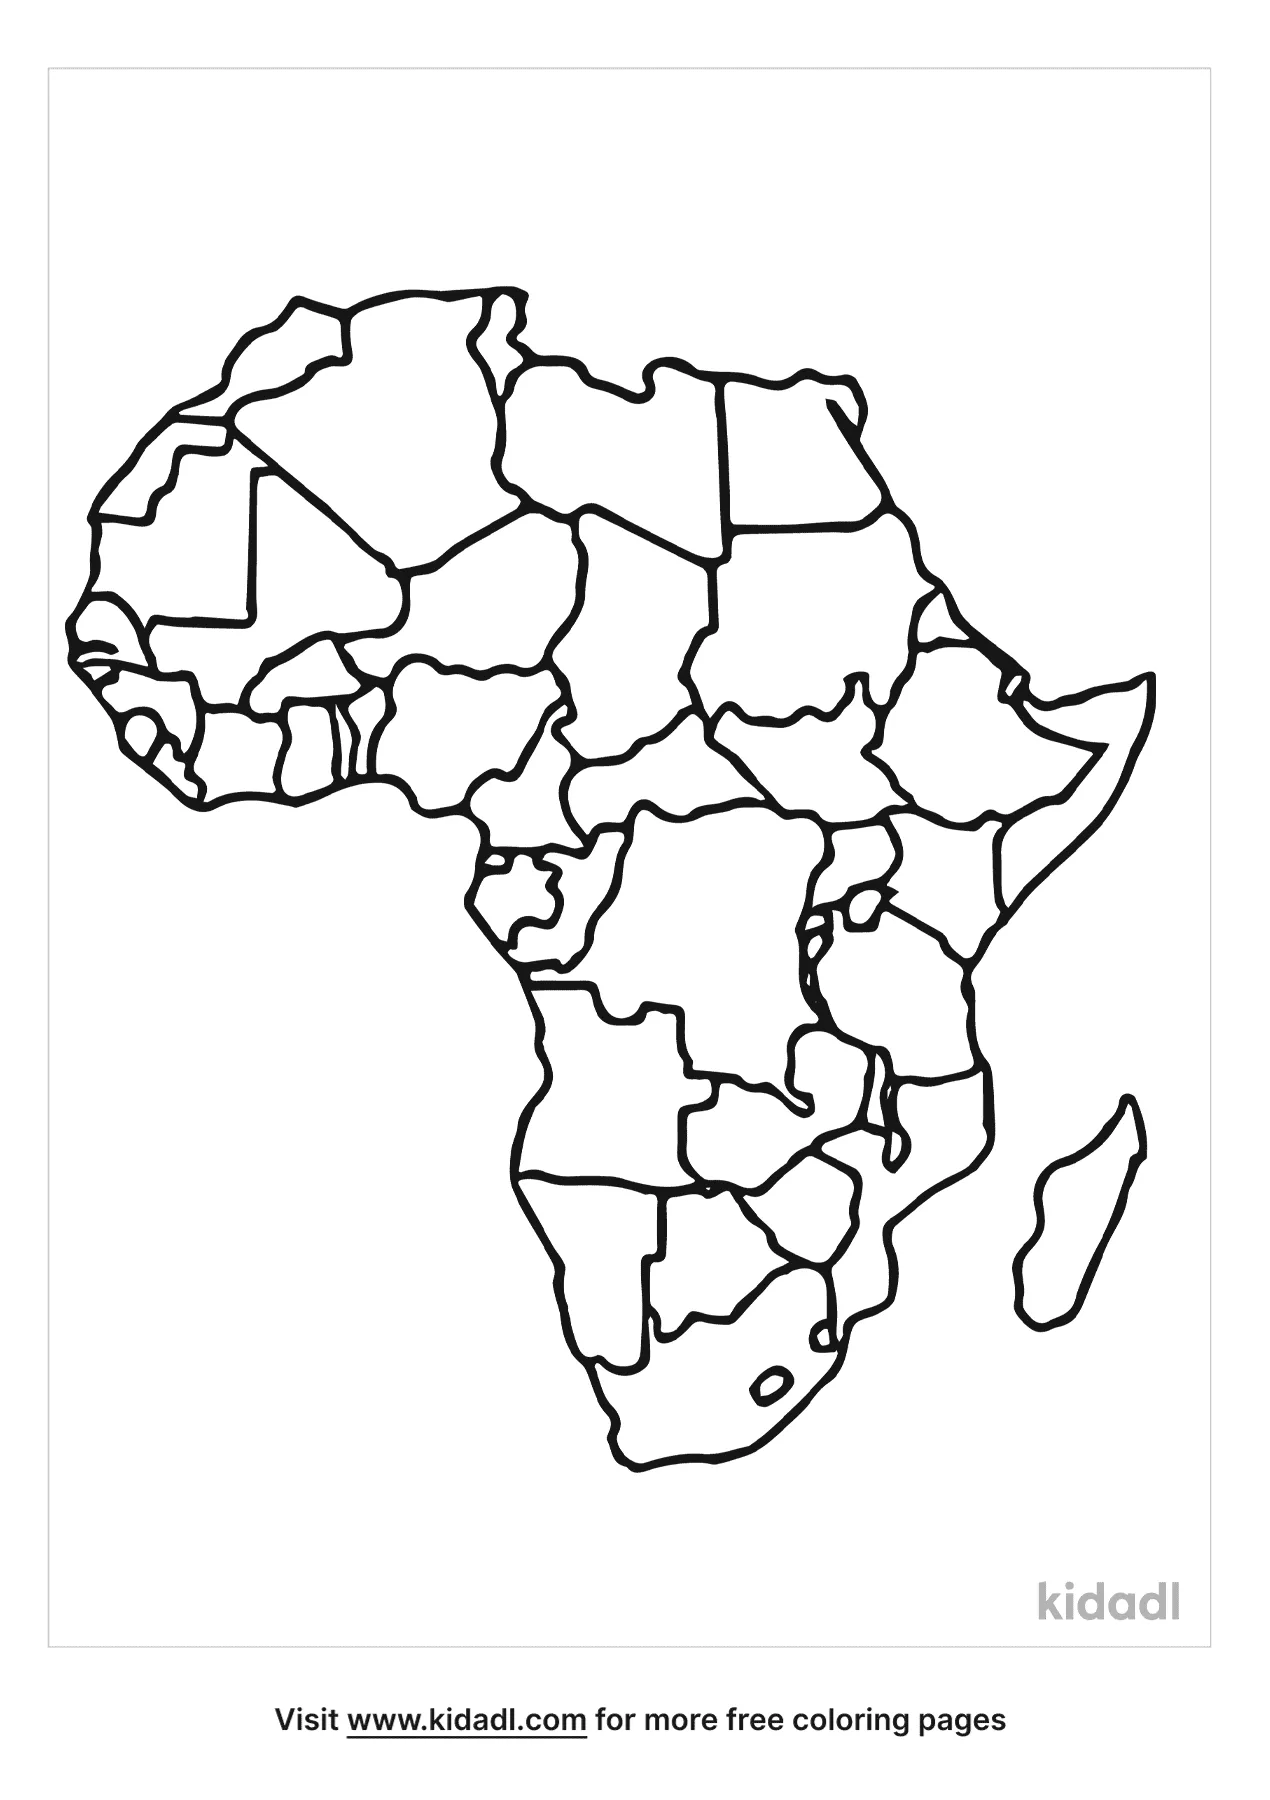 Map Of Africa Coloring Page